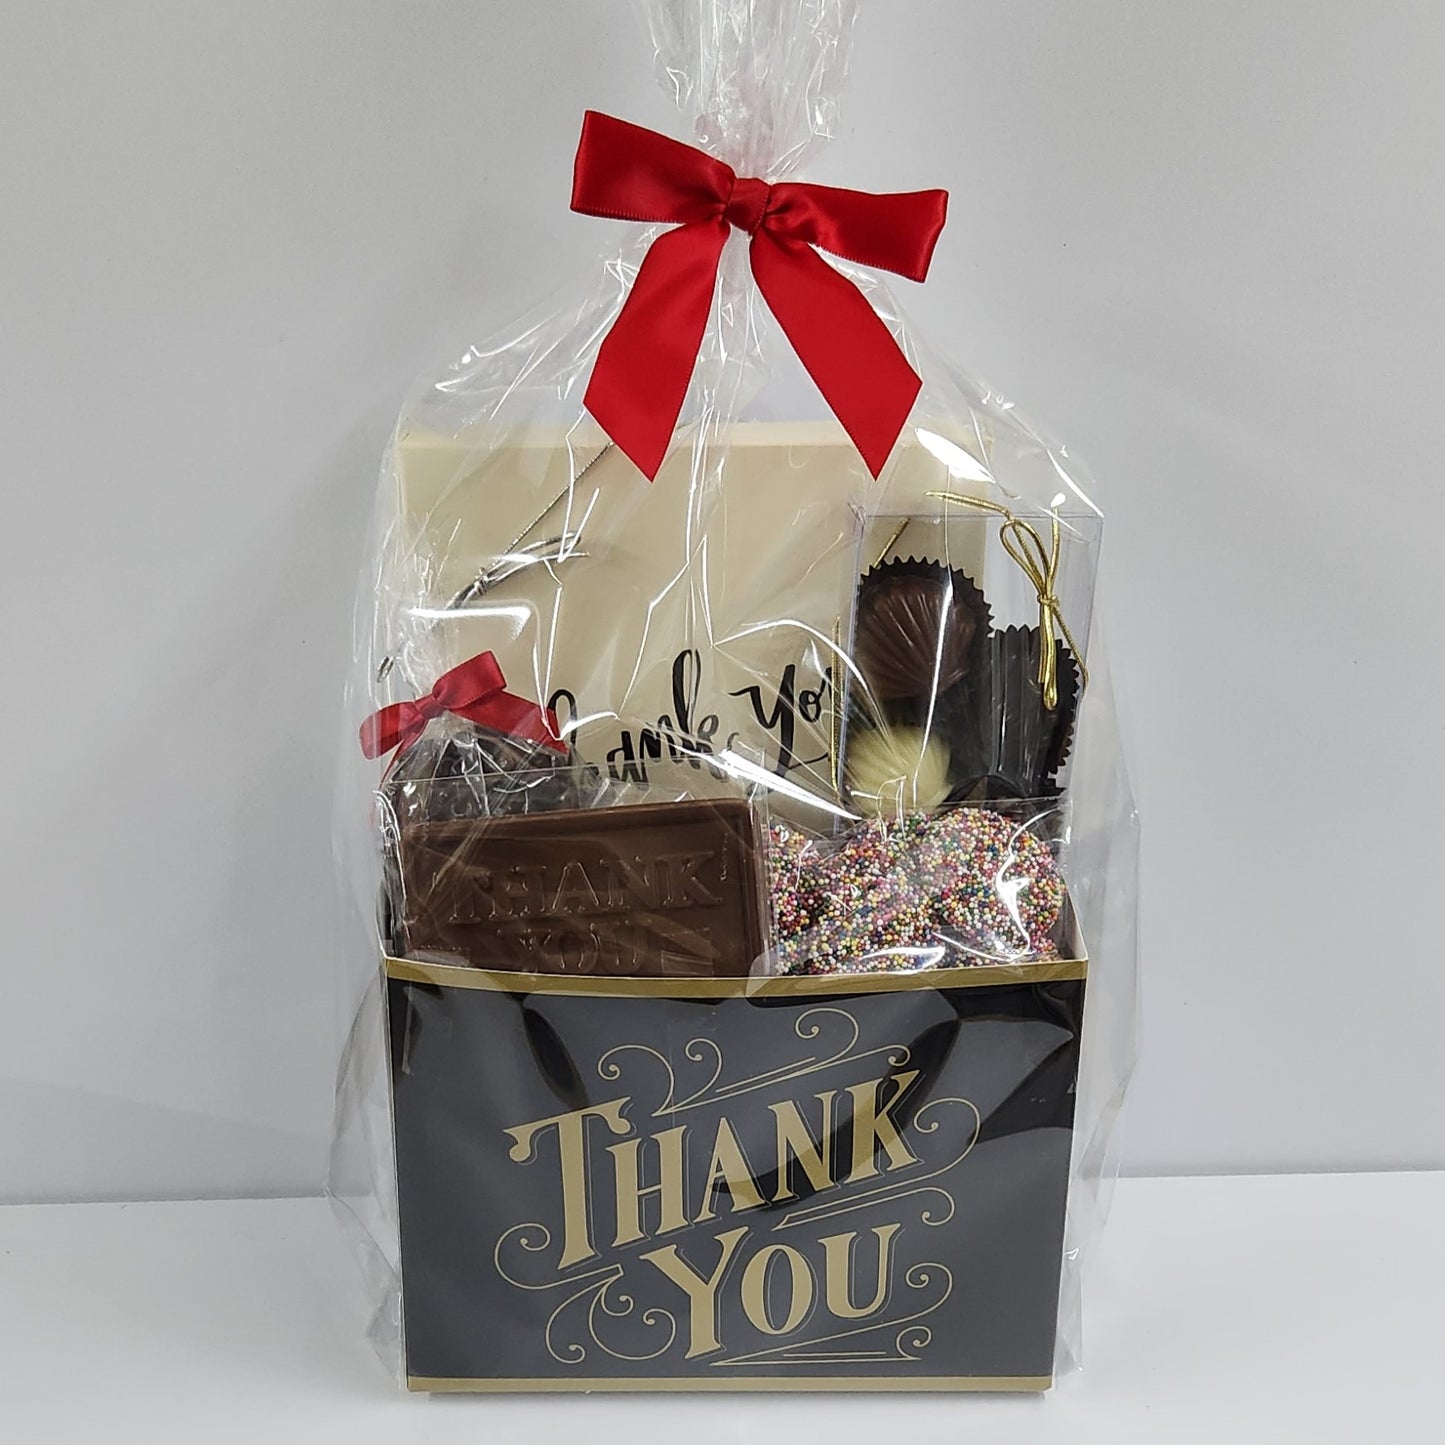 Black and Gold Thank You Gift Basket wrapped with plastic and a red bow